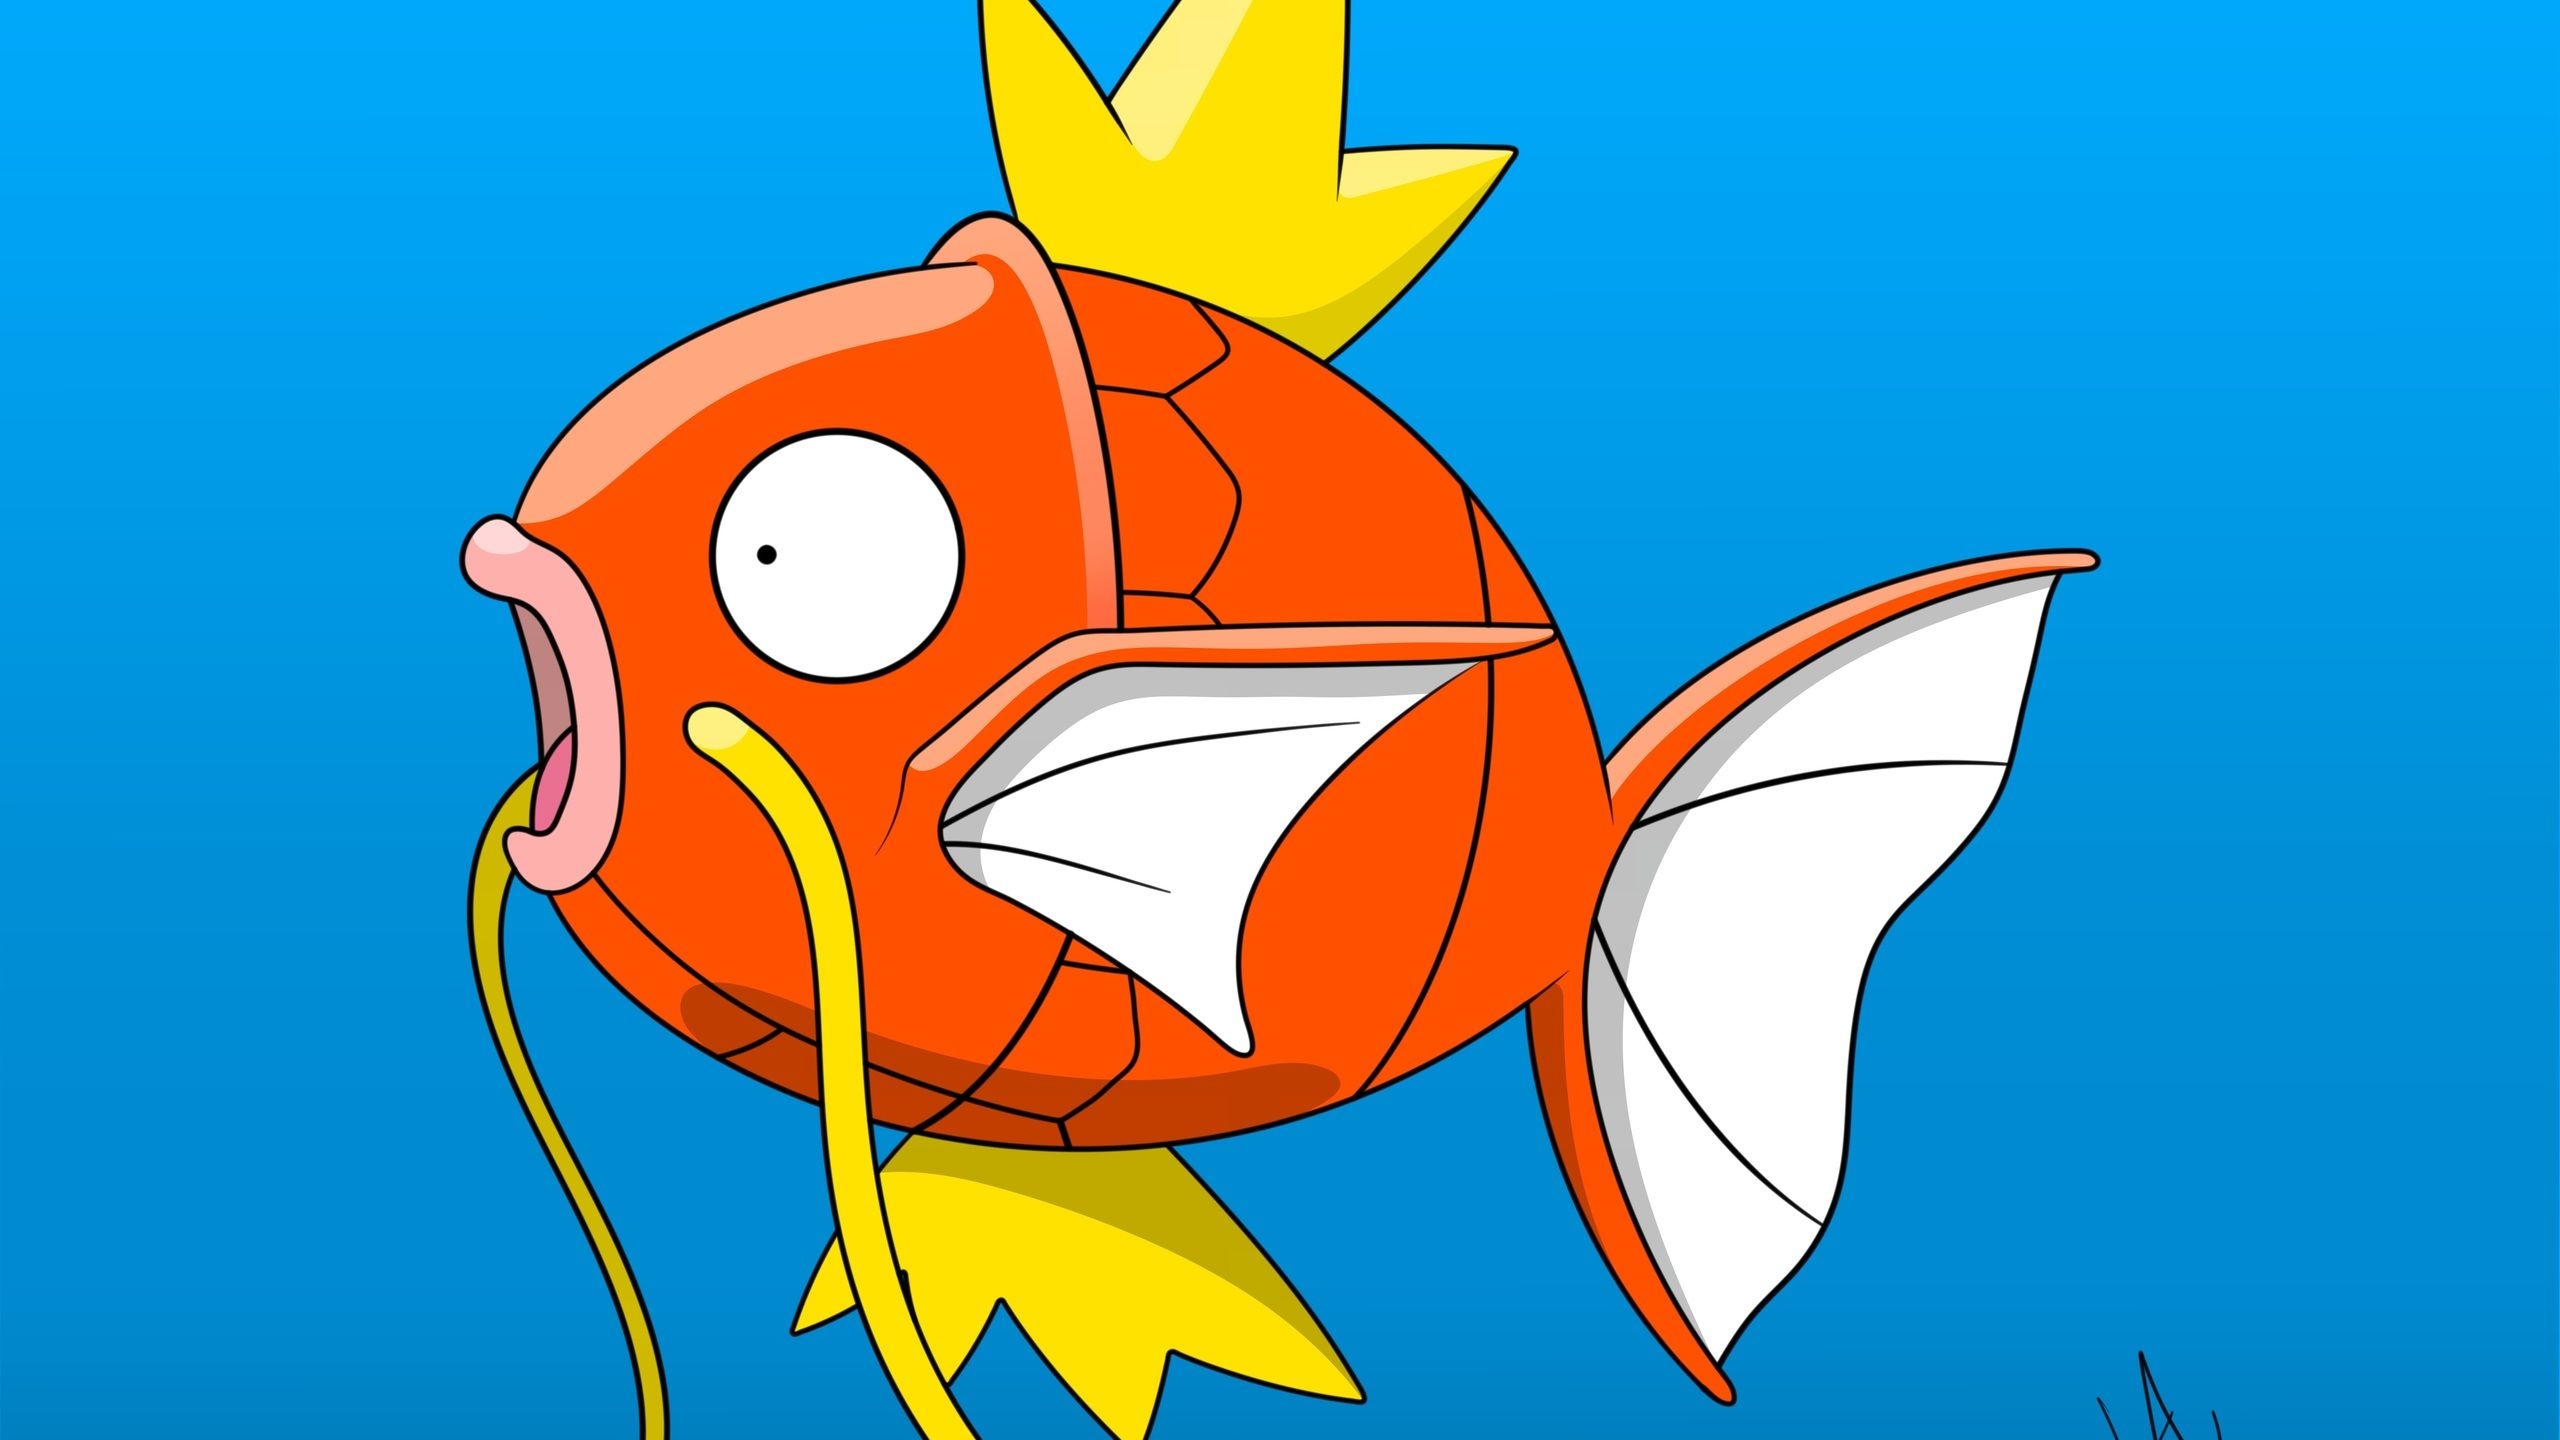 Magikarp anime, Funny wallpapers, Cute and lovable, Underdog story, 2560x1440 HD Desktop